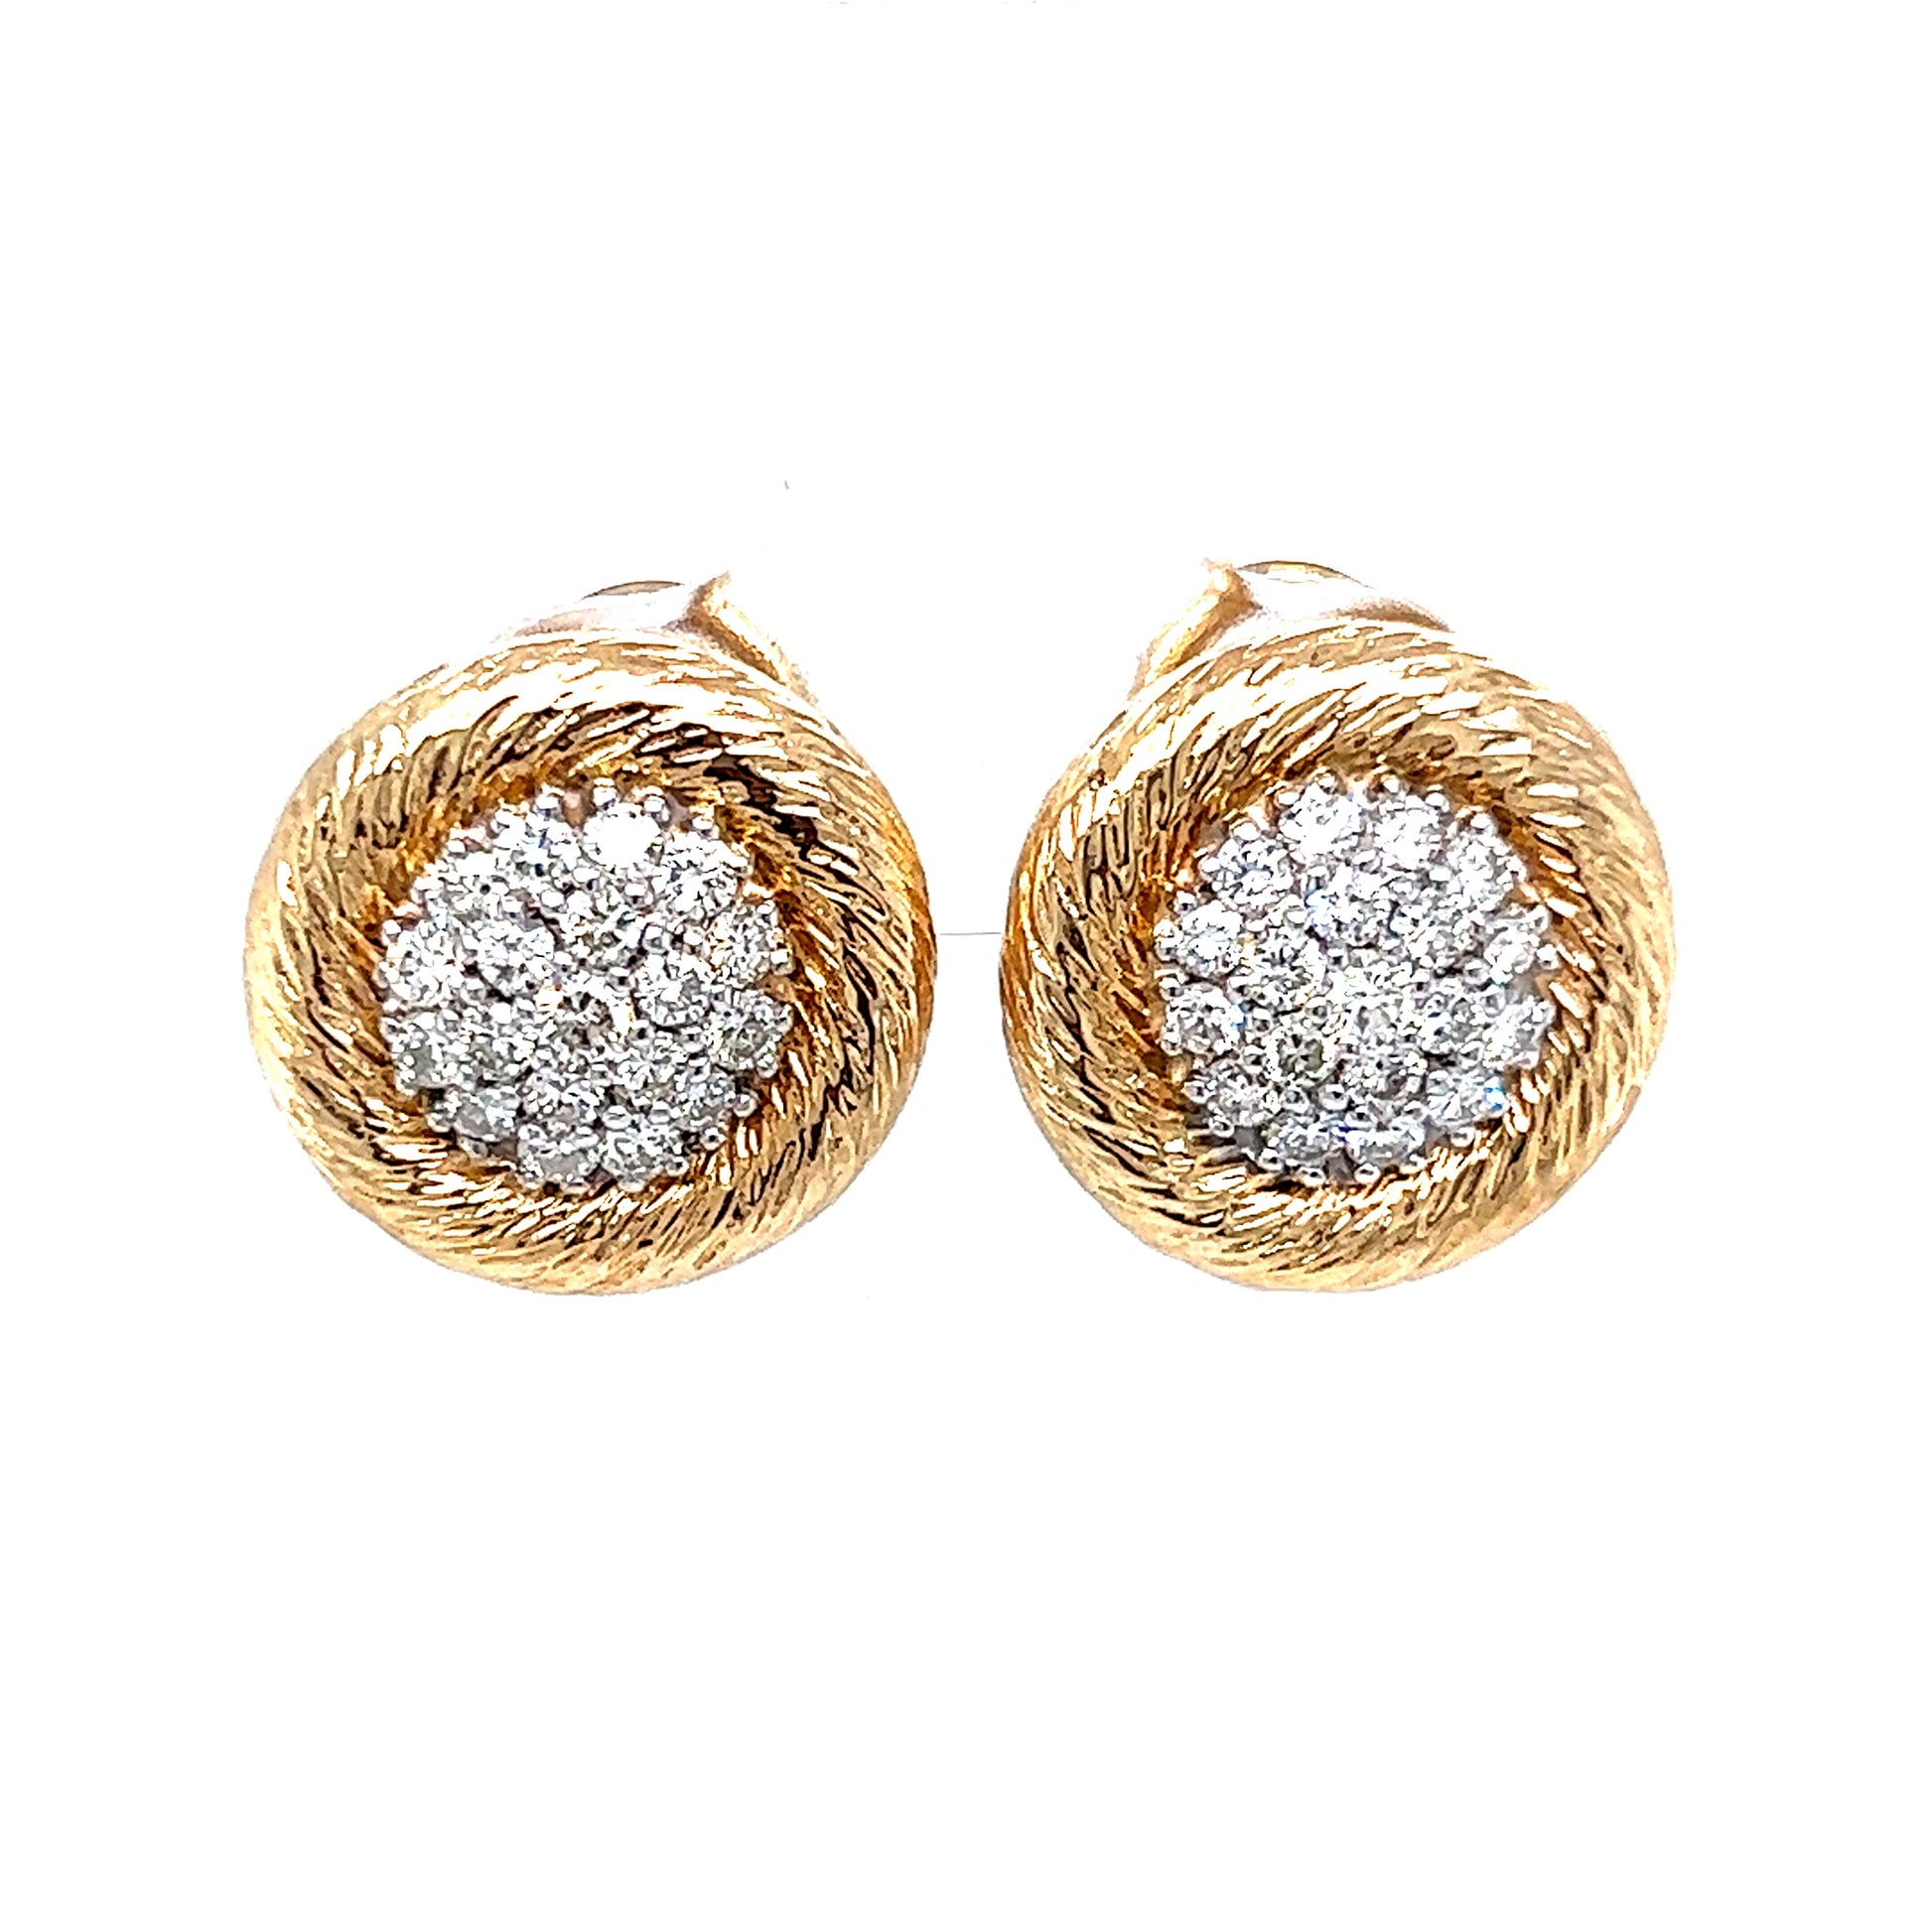 1.44 Pave Diamond Stud Earrings in 14k Yellow & White GoldComposition: 14 Karat Yellow Gold/14 Karat White GoldTotal Diamond Weight: 1.44 ctTotal Gram Weight: 7.5 gInscription: 14k